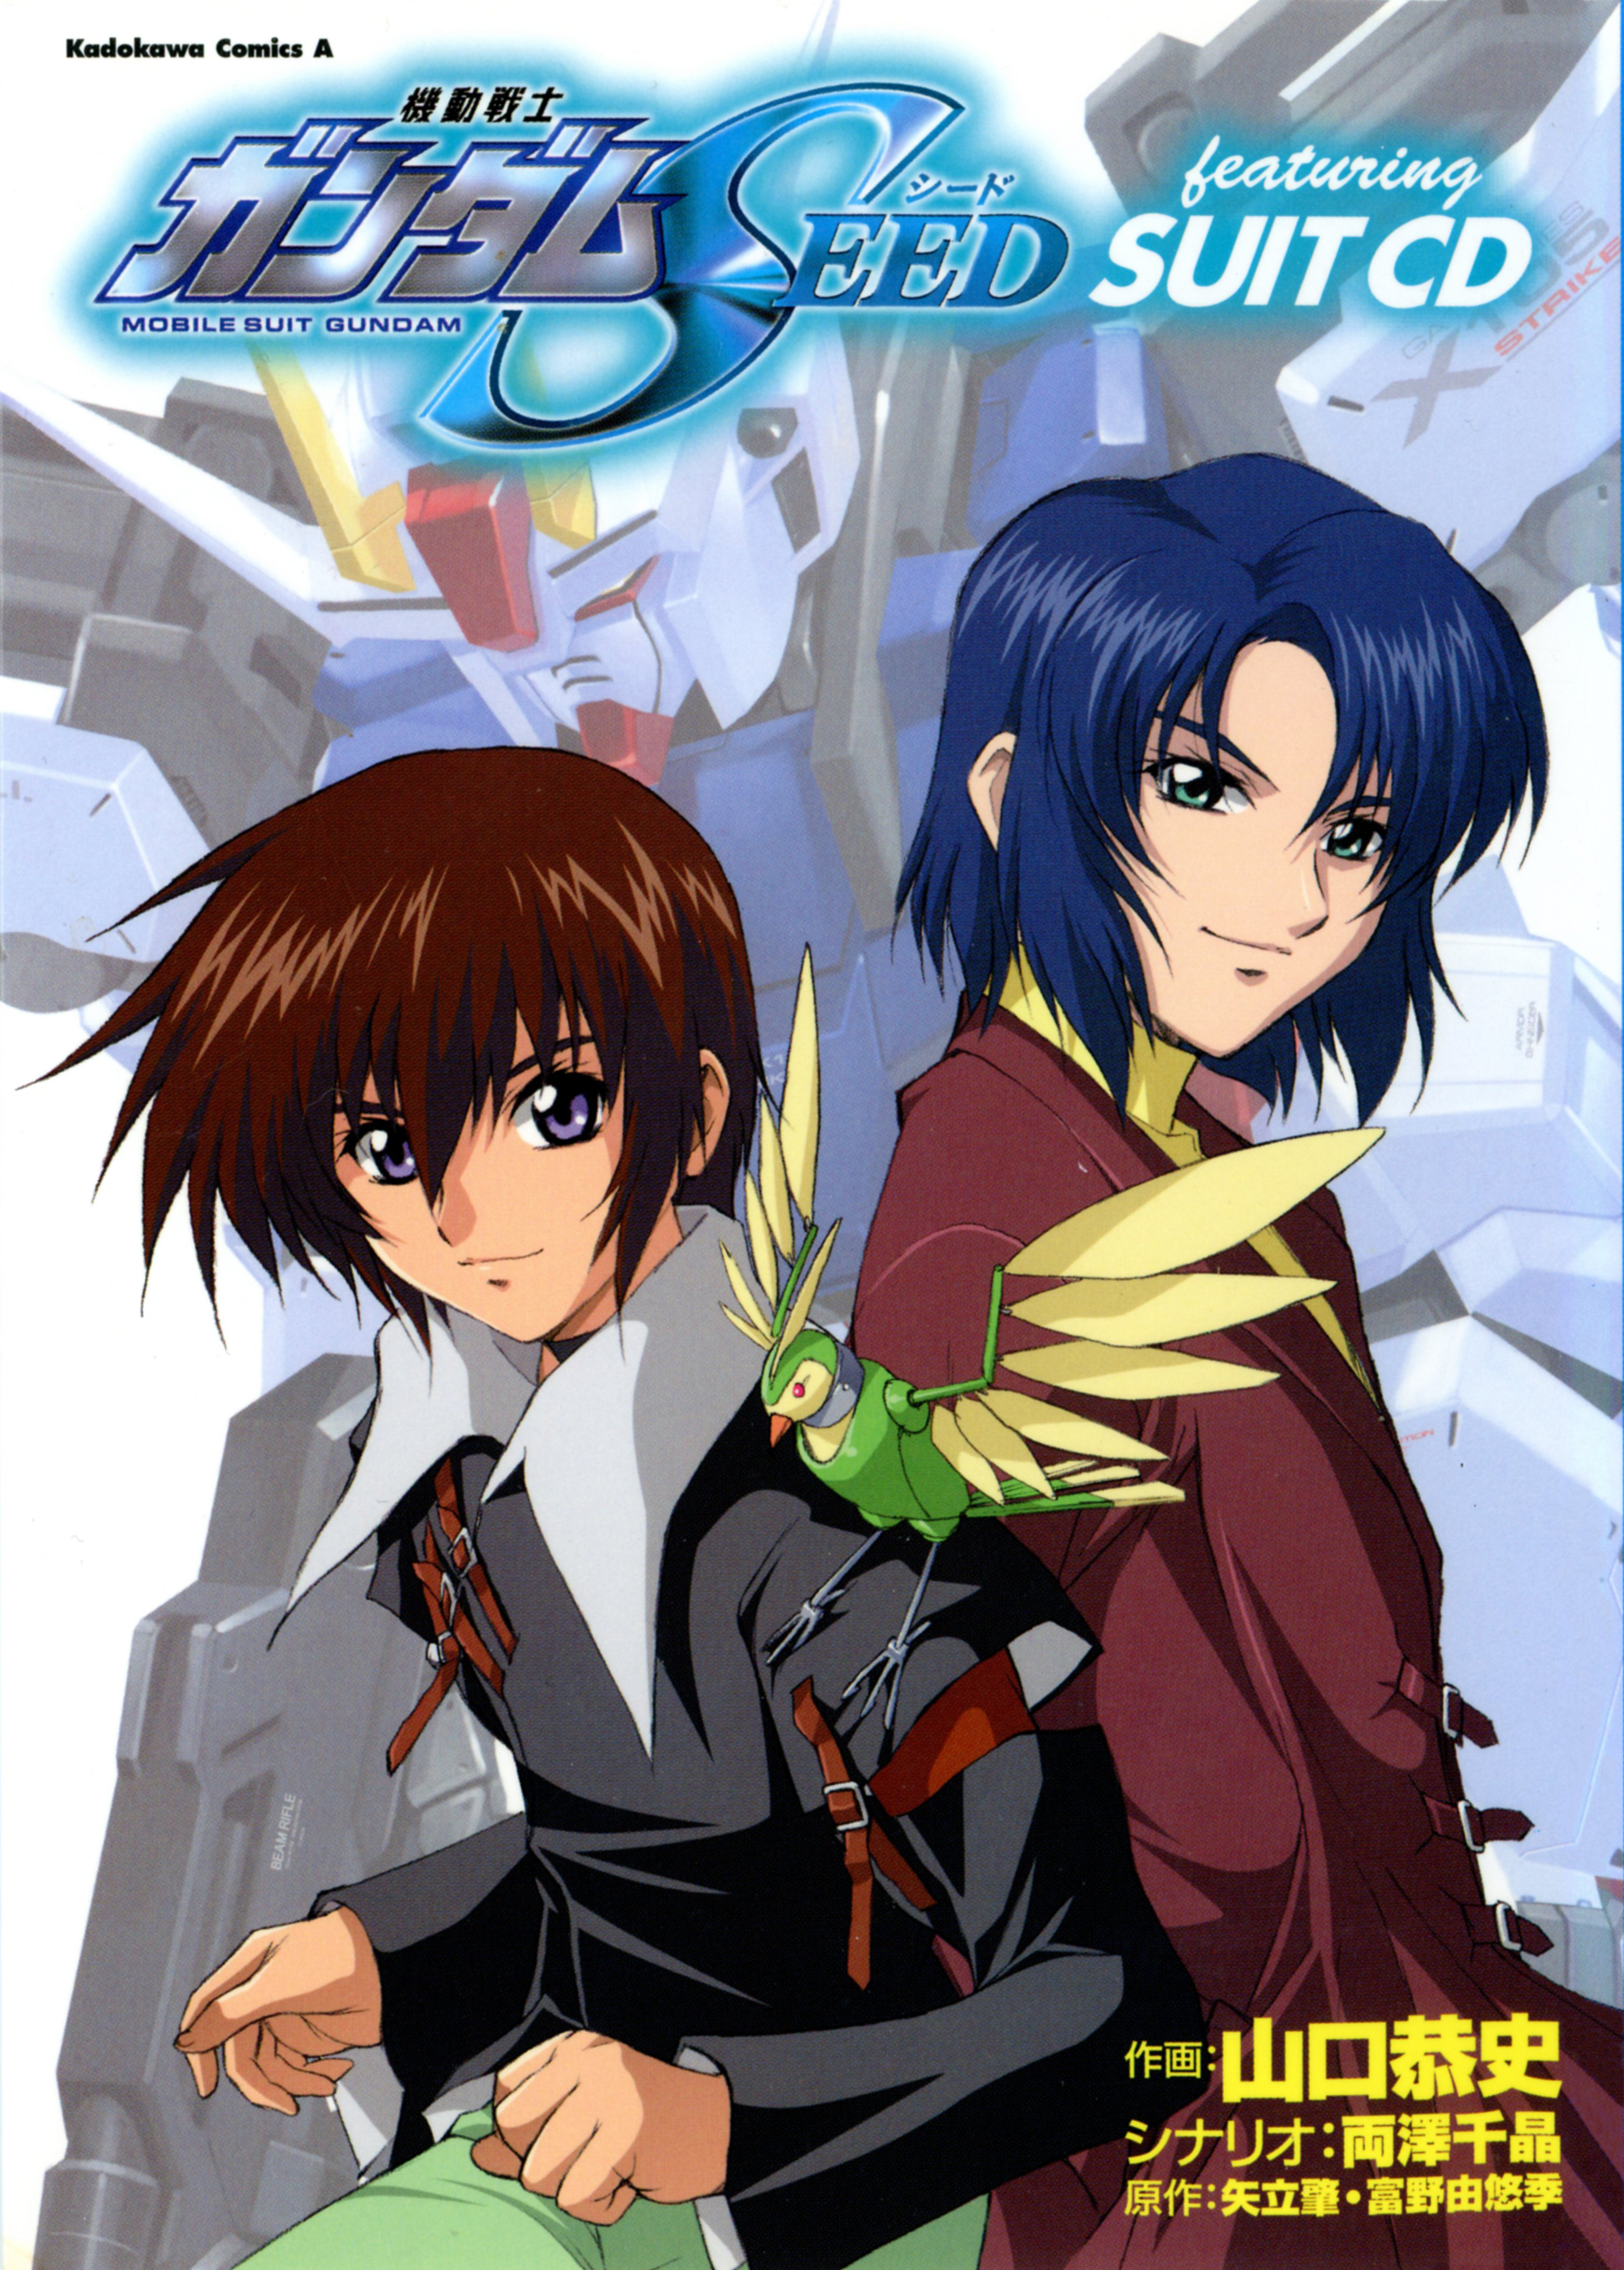 Mobile Suit Gundam SEED featuring SUIT CD